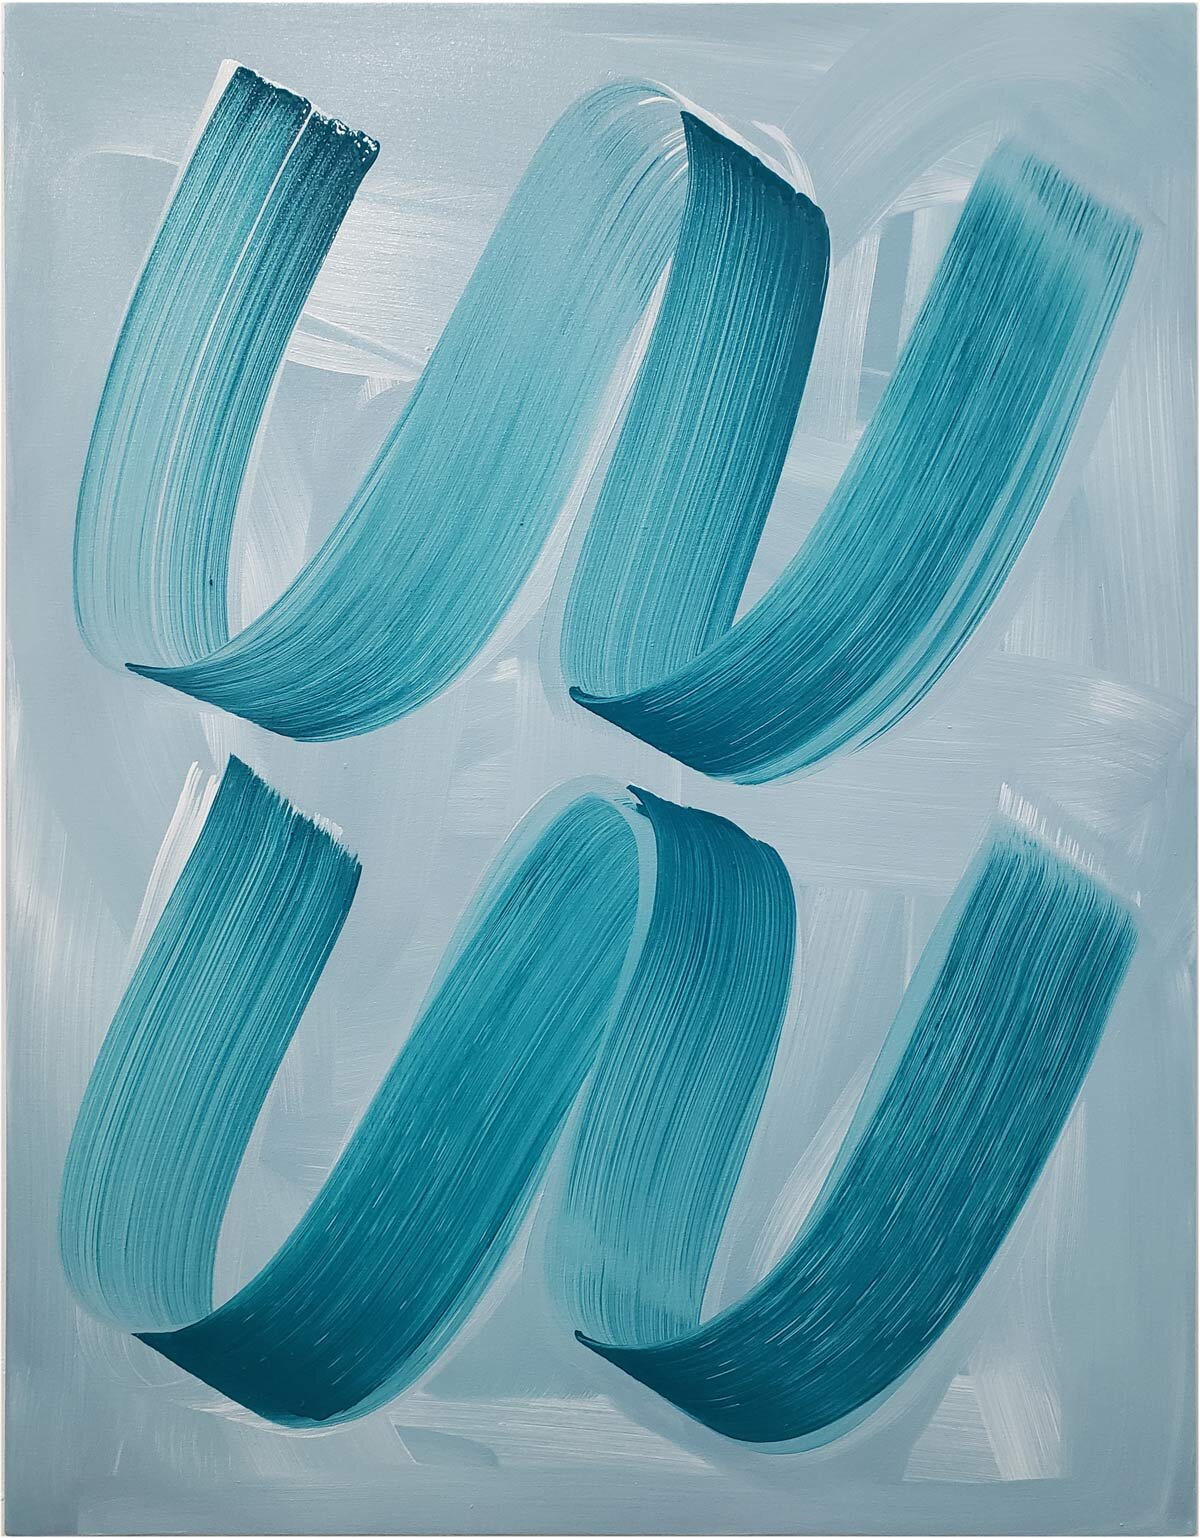   Do-si-do , 2019 oil on canvas 36 x 28 in.  Available at AucArt:  https://www.aucart.com/artwork/do-si-do/  